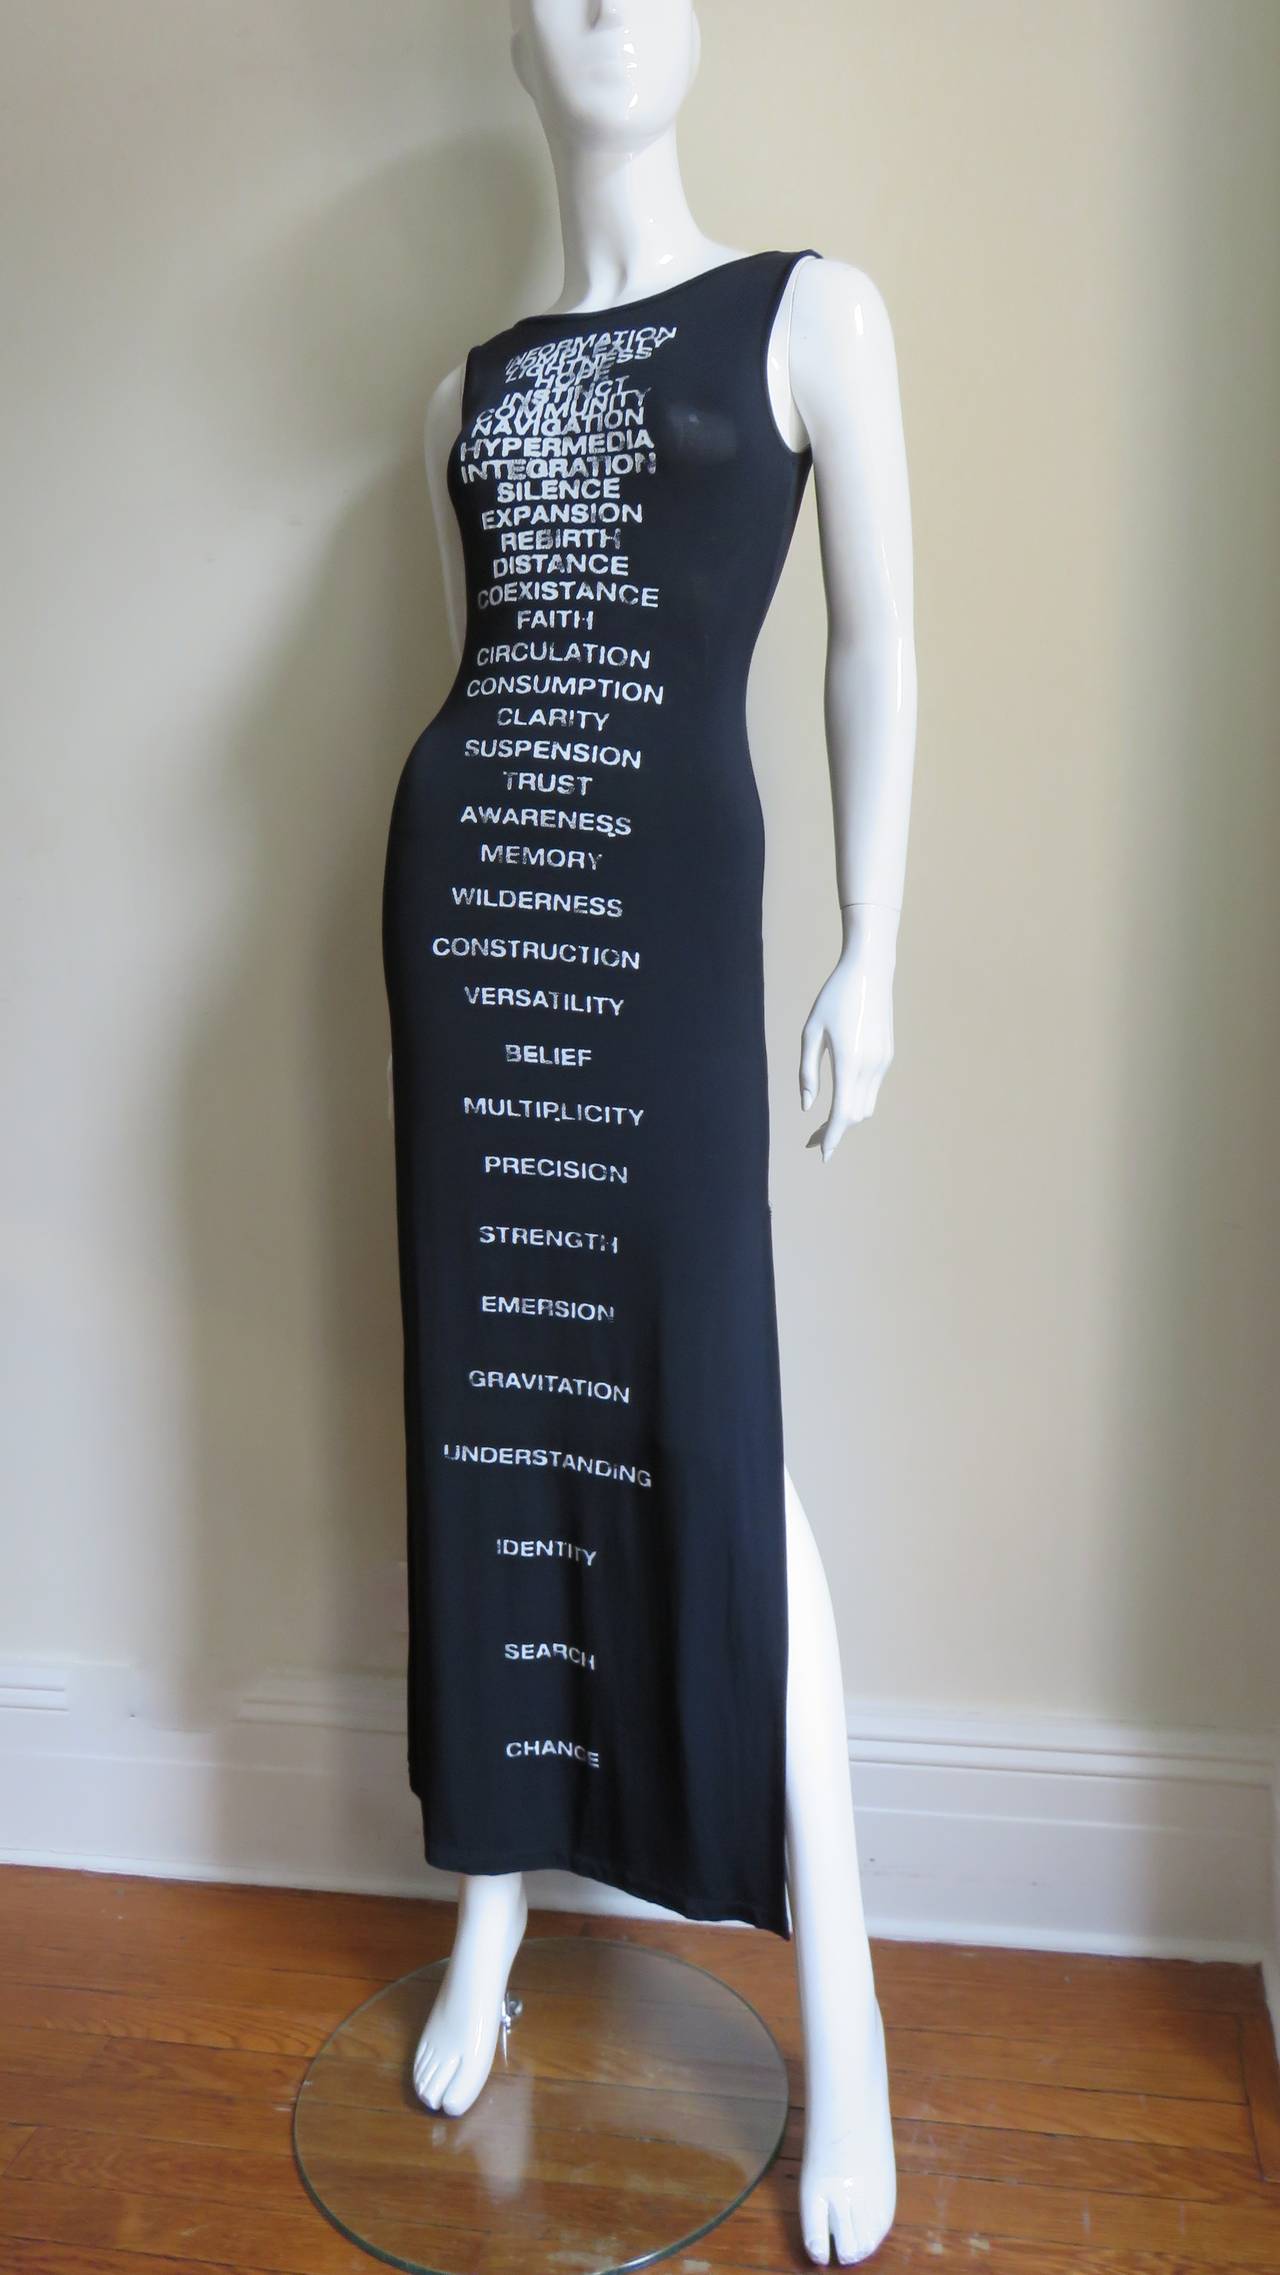 dresses with words on them